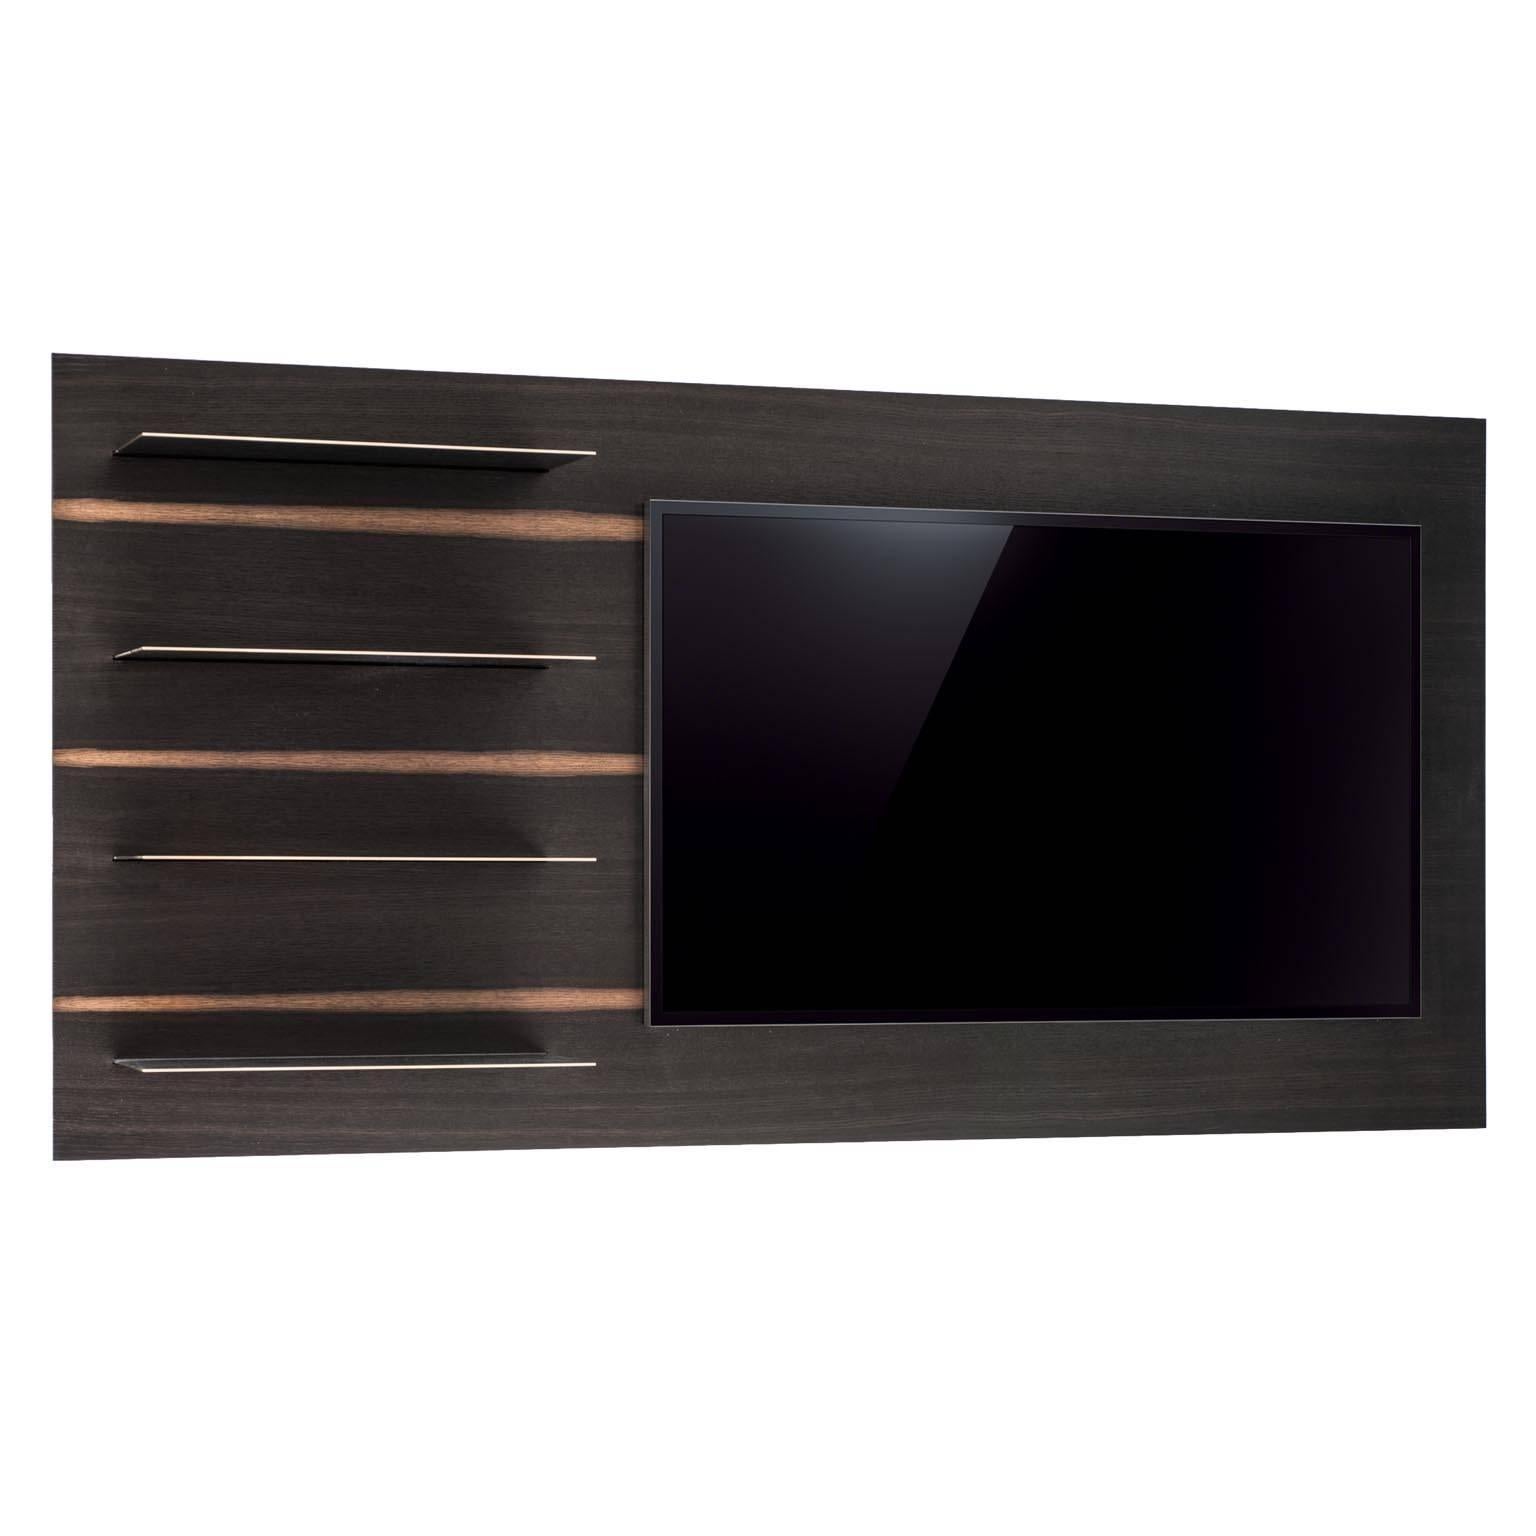 Watanabe Shelf Unit for TV Mount, Dark White Oak with Patinated Bronze Shelves For Sale